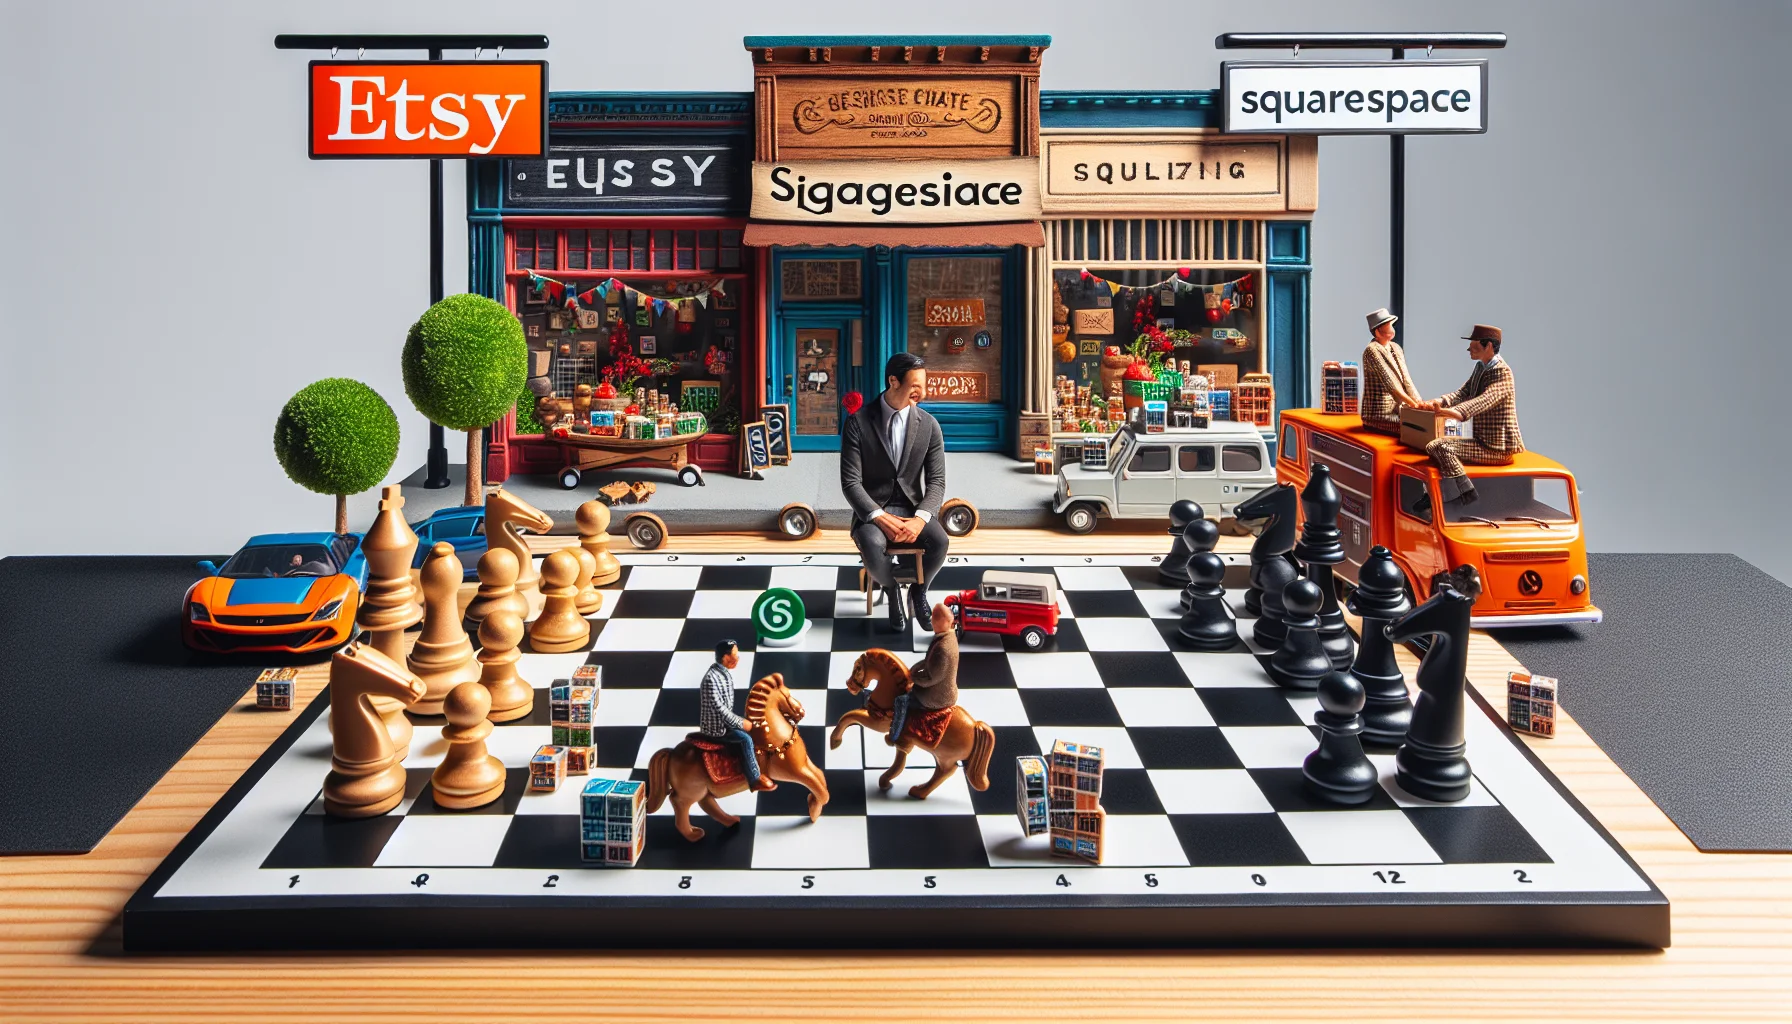 Create a humorous yet realistic scenario where Etsy, represented as a vintage, rustic, and bespoke boutique store filled with handmade items, is engaged in a playful competition with Squarespace, depicted as a sleek, modernistic, and sophisticated digital agency. They're participating in an engaging competition of web hosting, visualized as a friendly but intense chess match where each playing piece is subtly indicative of web-design elements like domains, templates, and web-building tools. The setting is in a lively tech town and the mood is playful.